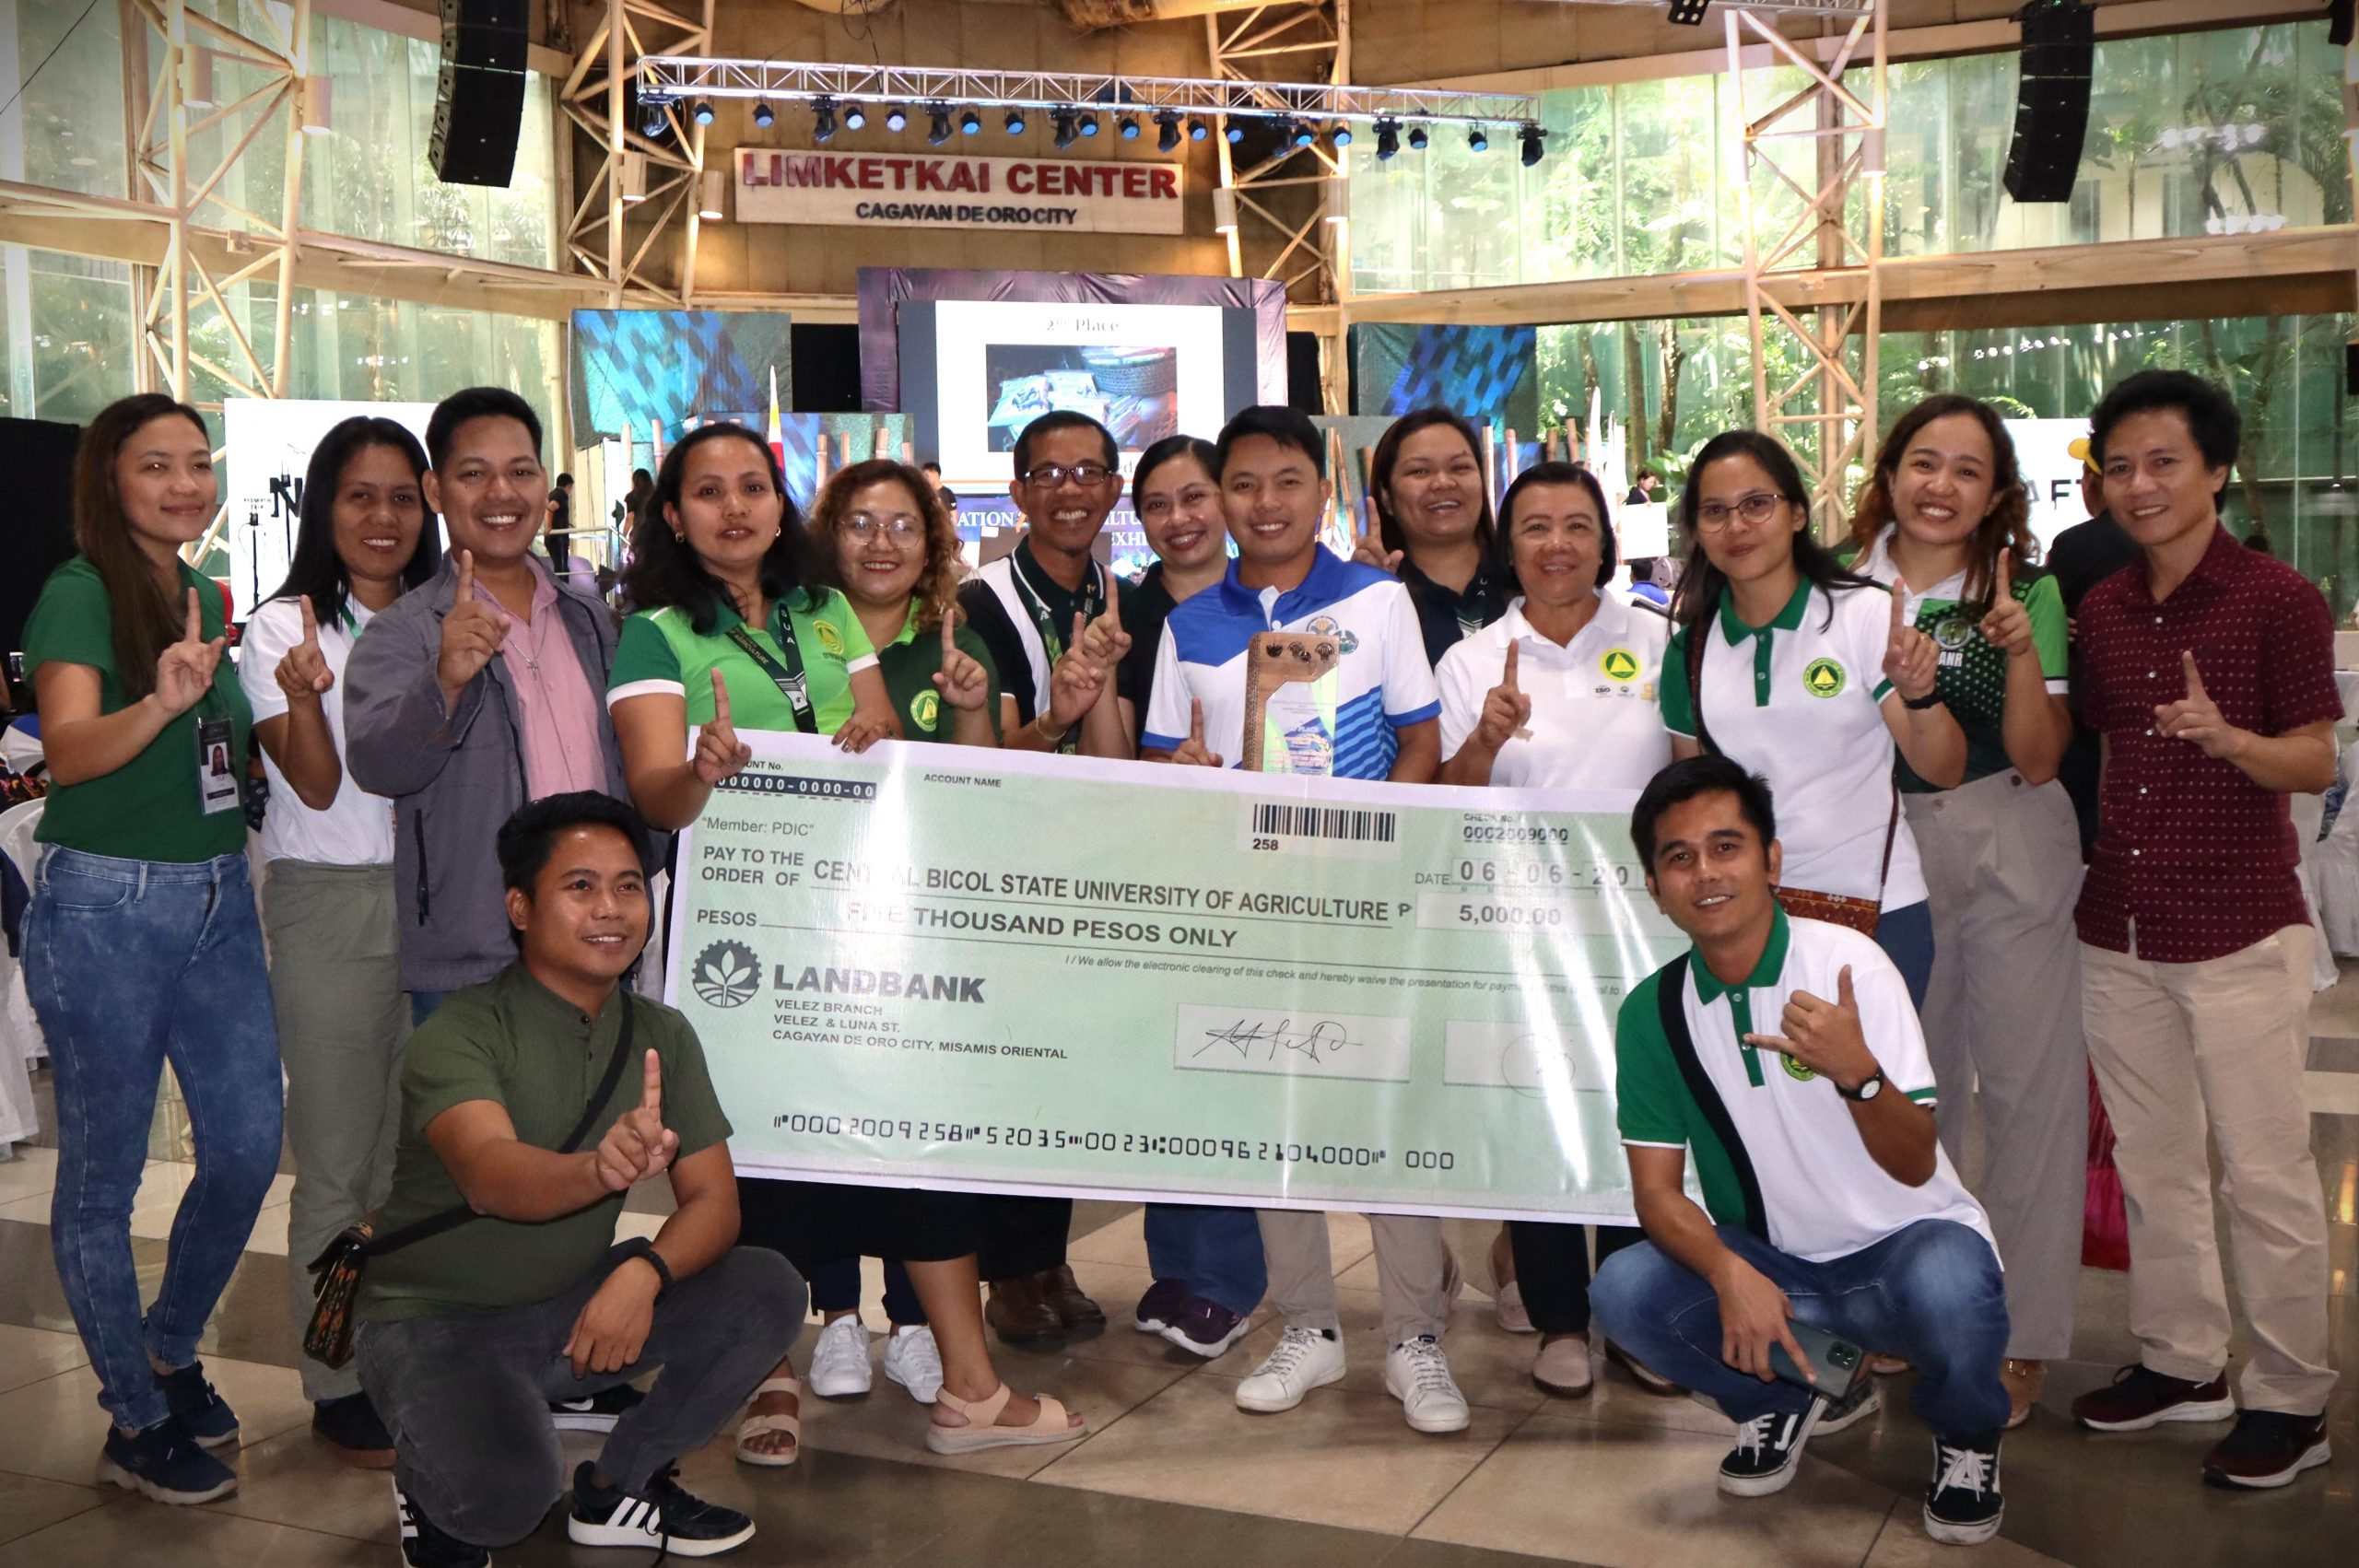 STINGLESS BEE PROPOLIS THROAT SPRAY BAGGED 3RD PLACE IN DA-BAR’S NAFTE